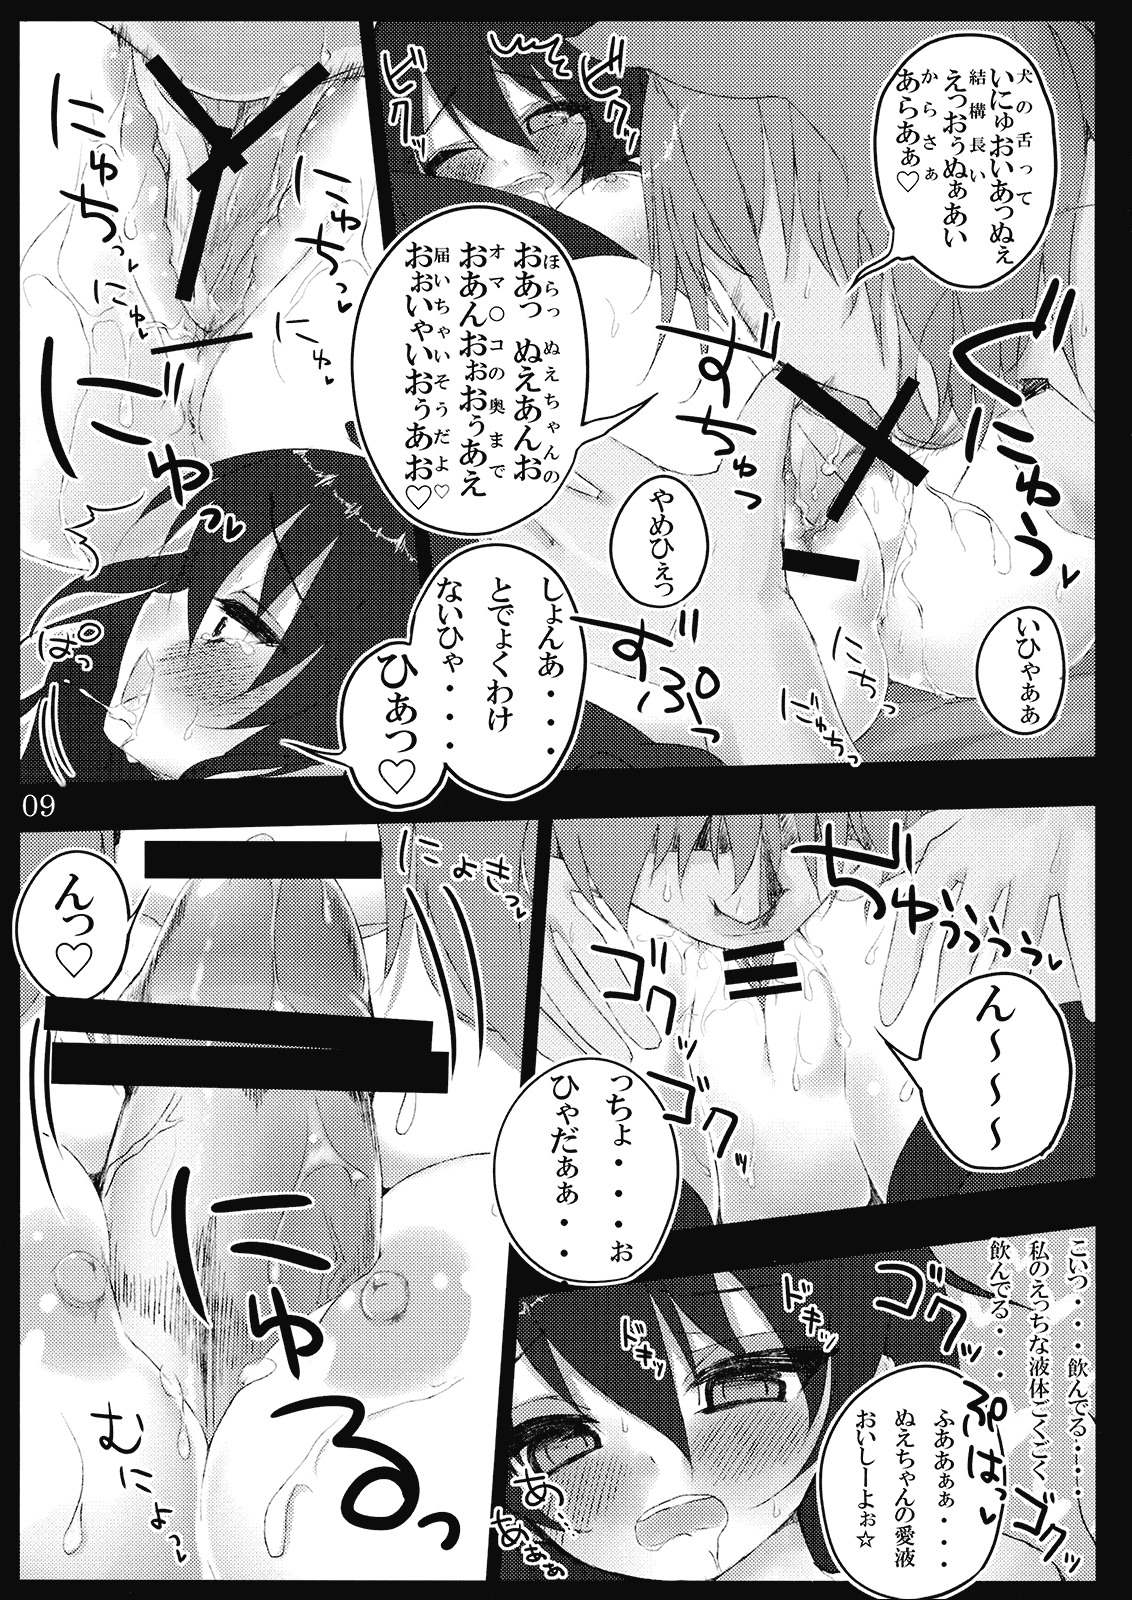 (C77) [39xream (Suzume Miku)] Nueccho! (Touhou Project) page 9 full